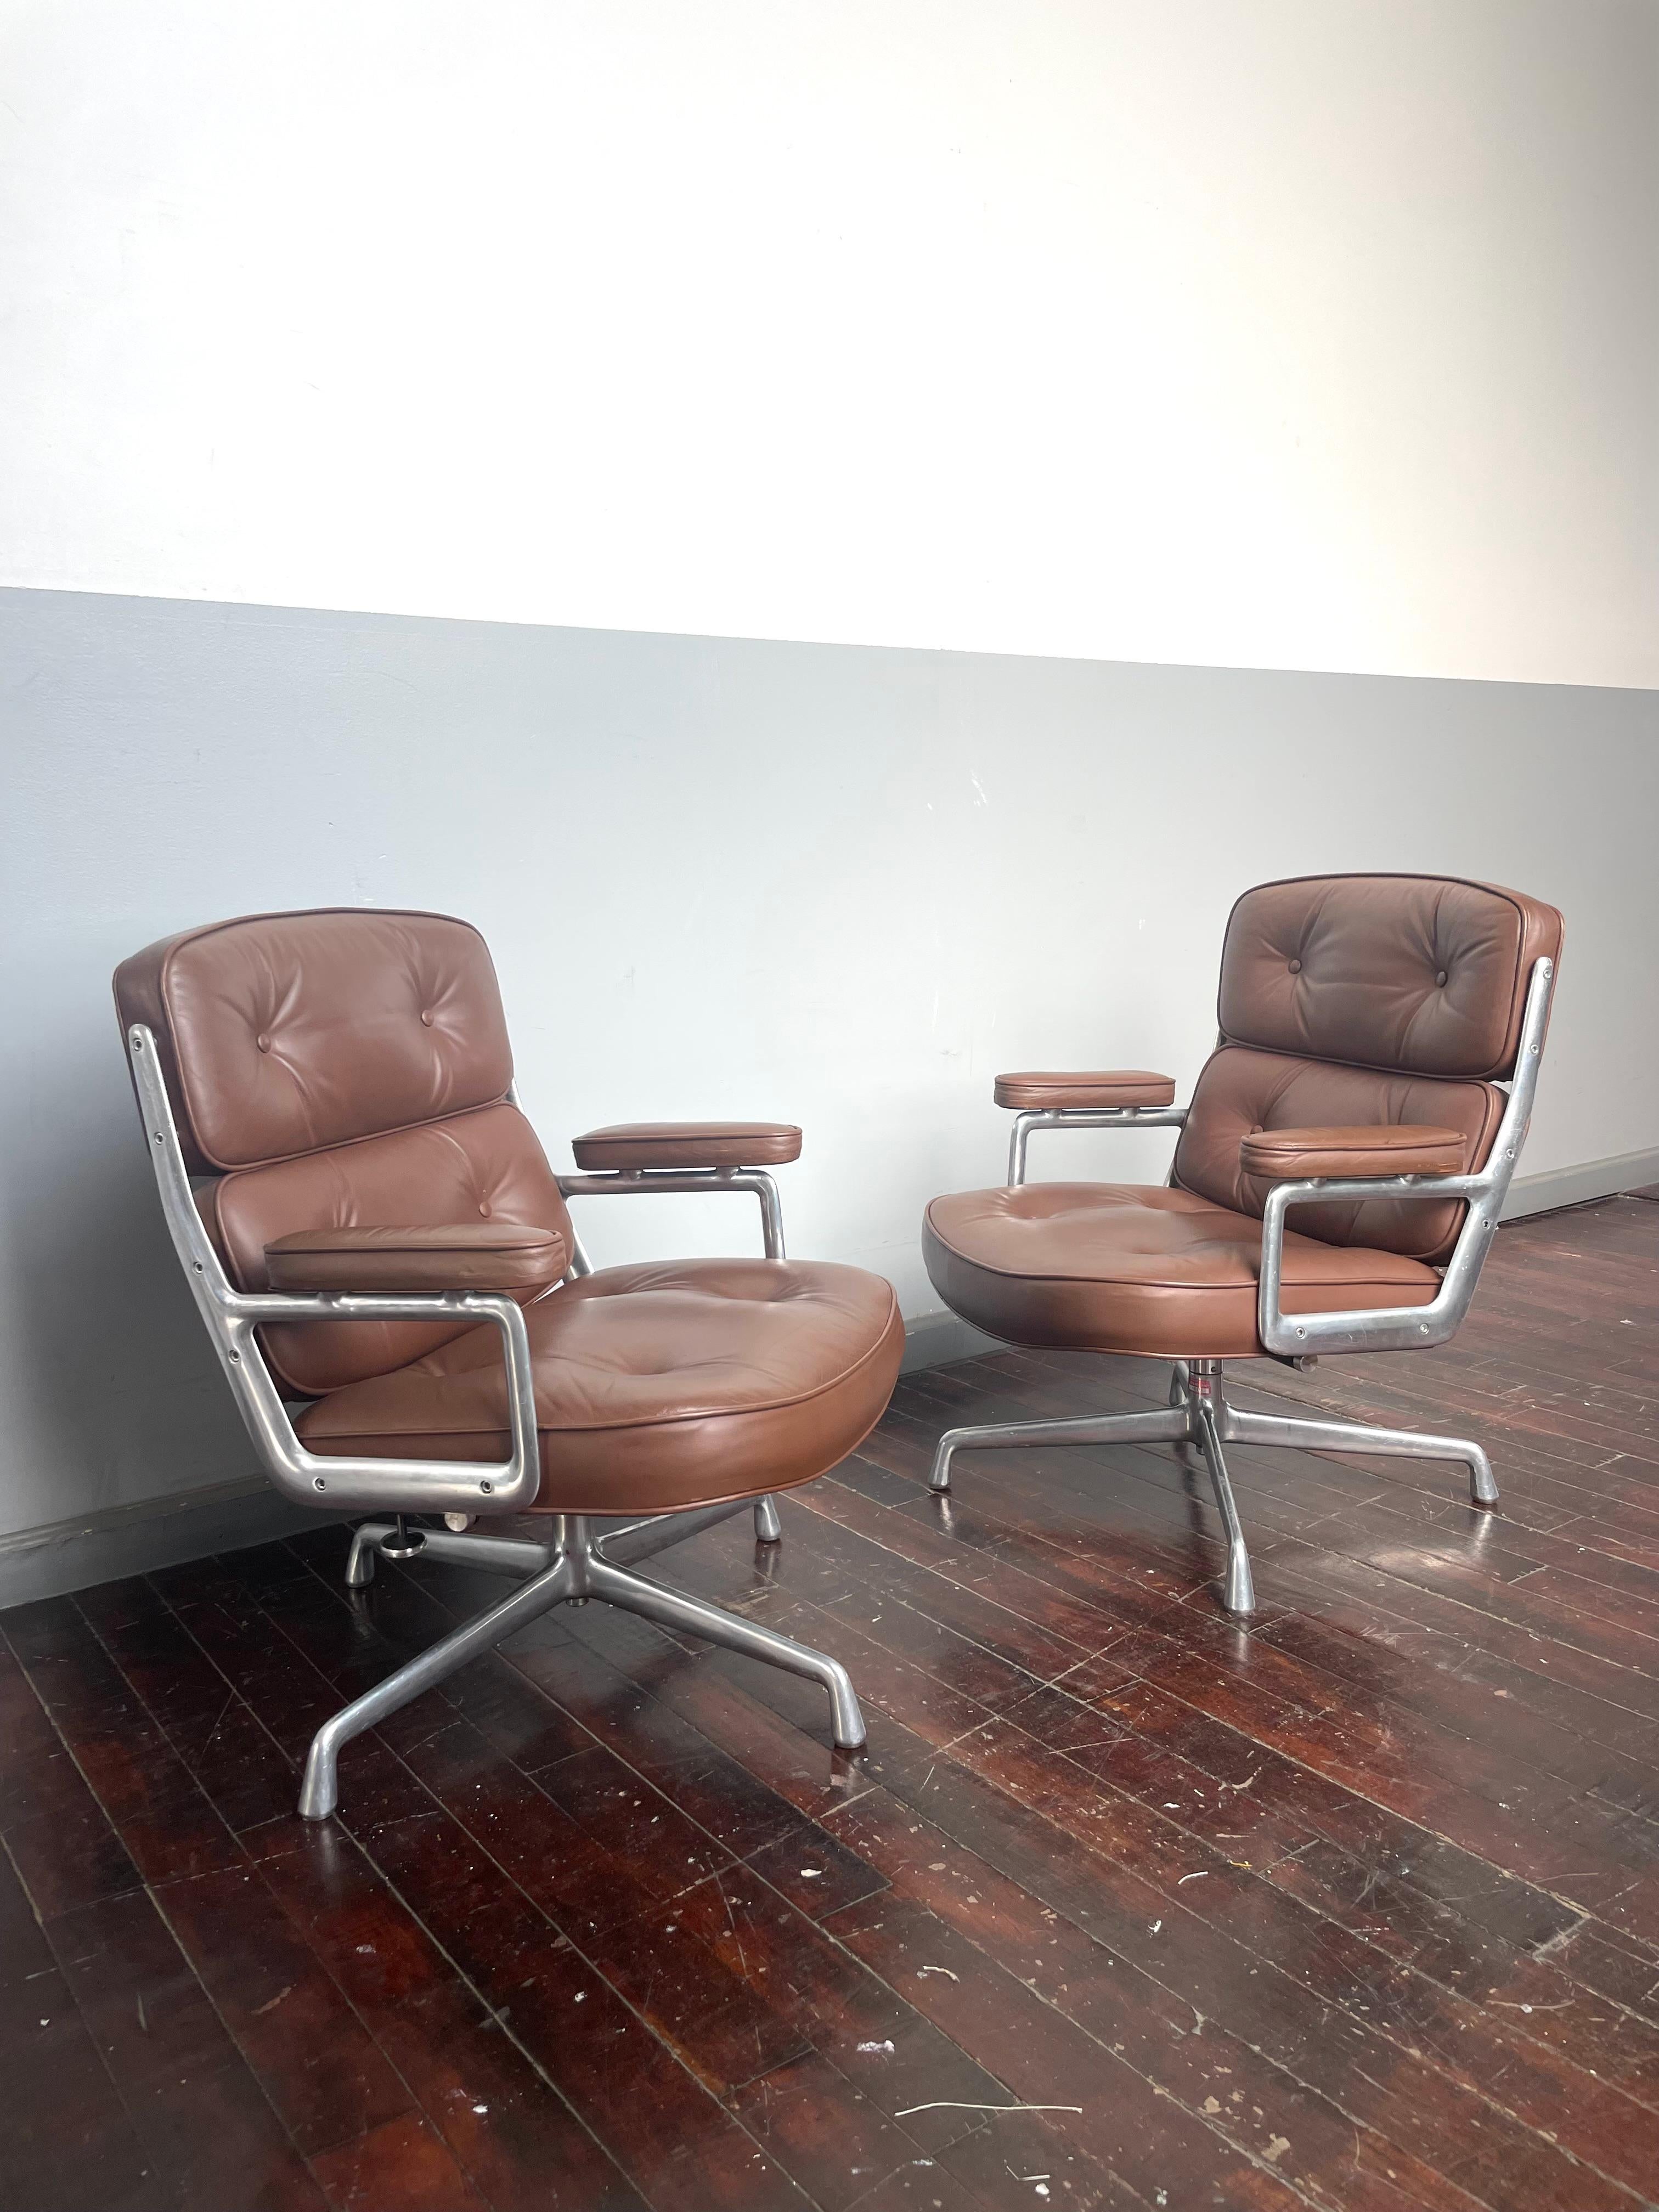 Rare find. 

Pair of 1979 Herman Miller Time Life Lobby Chairs in brown leather. 

Incredible character. Supreme comfort. 

Adjustable degree of recline. Adjustable seat height.

Chairs show some wear on the frame and leather. One replacement brown